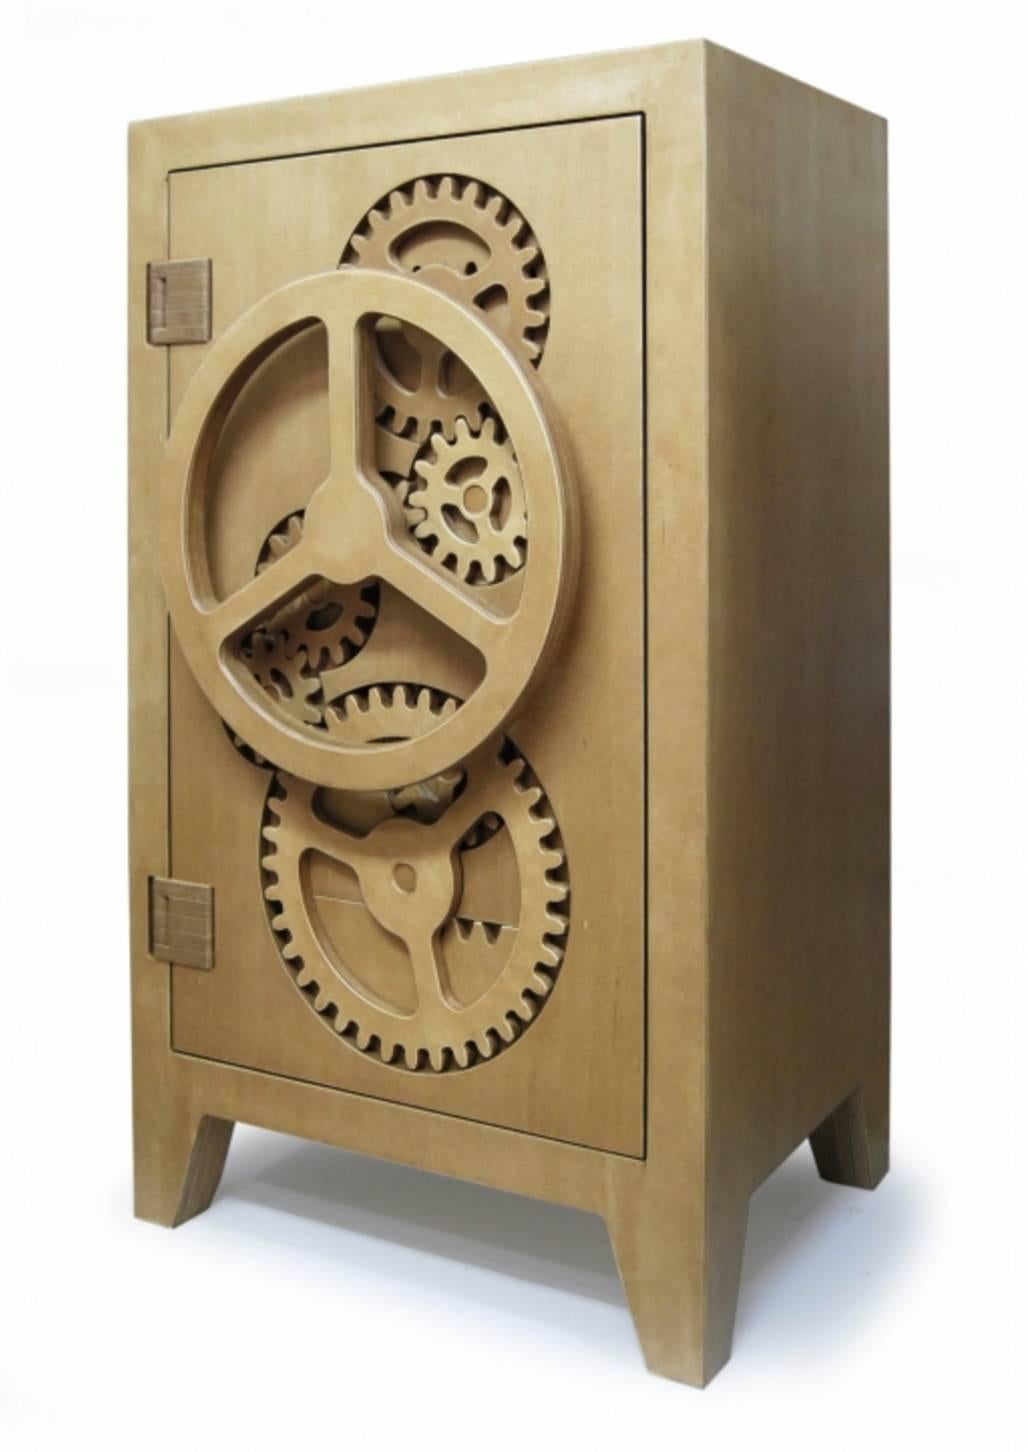 Mr. Knox is a funny translation of a heavy steel safe box into a smart and playful wooden piece of furniture.

The cnc cut gears fit perfectly together which enables the closing system to work exact as its steel example.

The cabinet is 99,9%